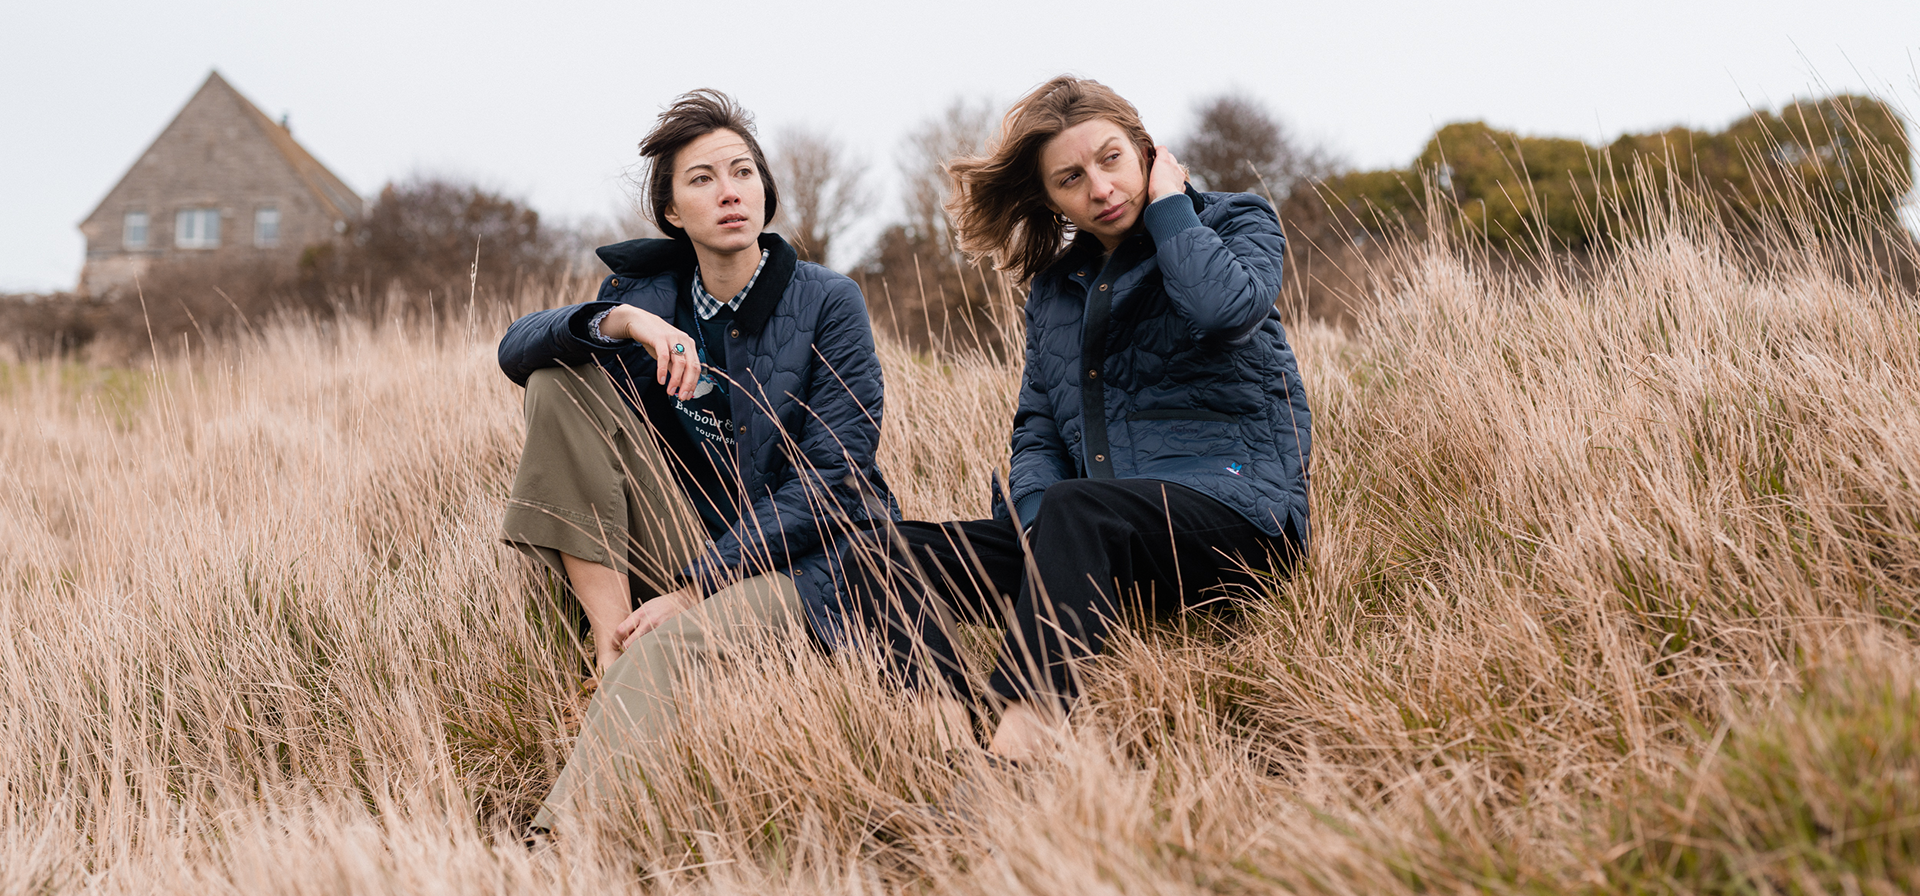 (Barbour) modern country ss20 collection styled by lauren yates and brittany bathgate